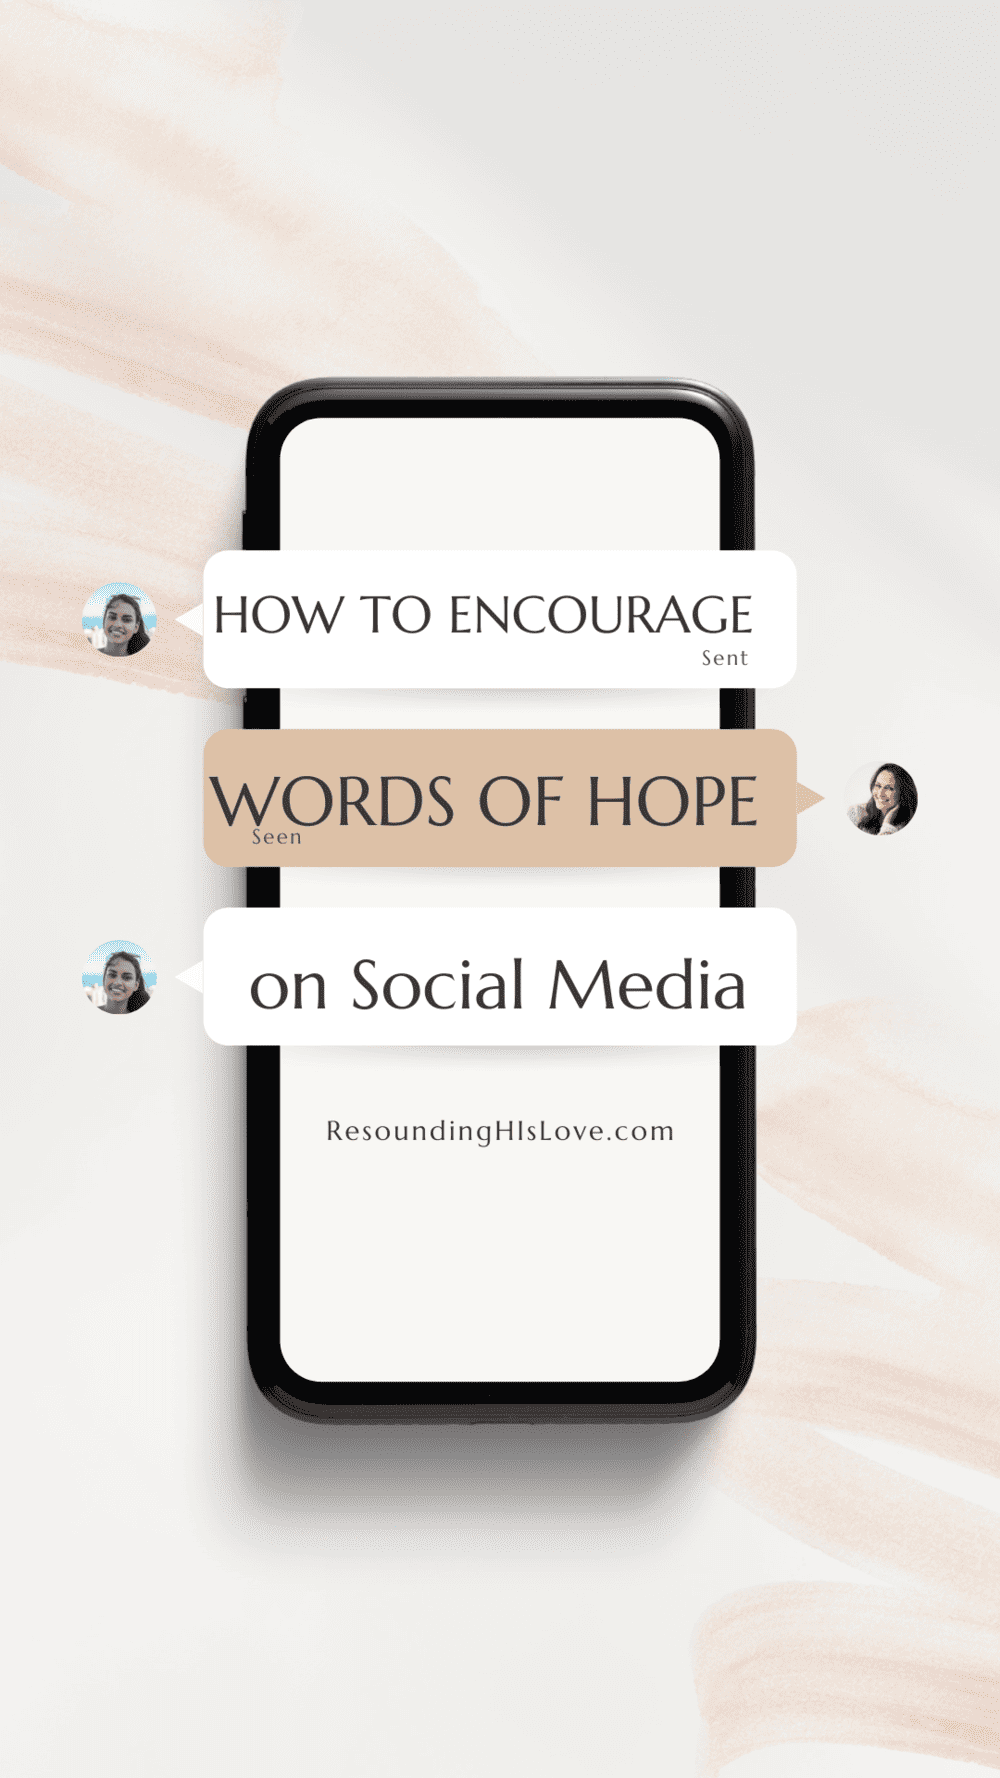 an image of a cell phone with text How to Encourage Words of Hope on Social Media